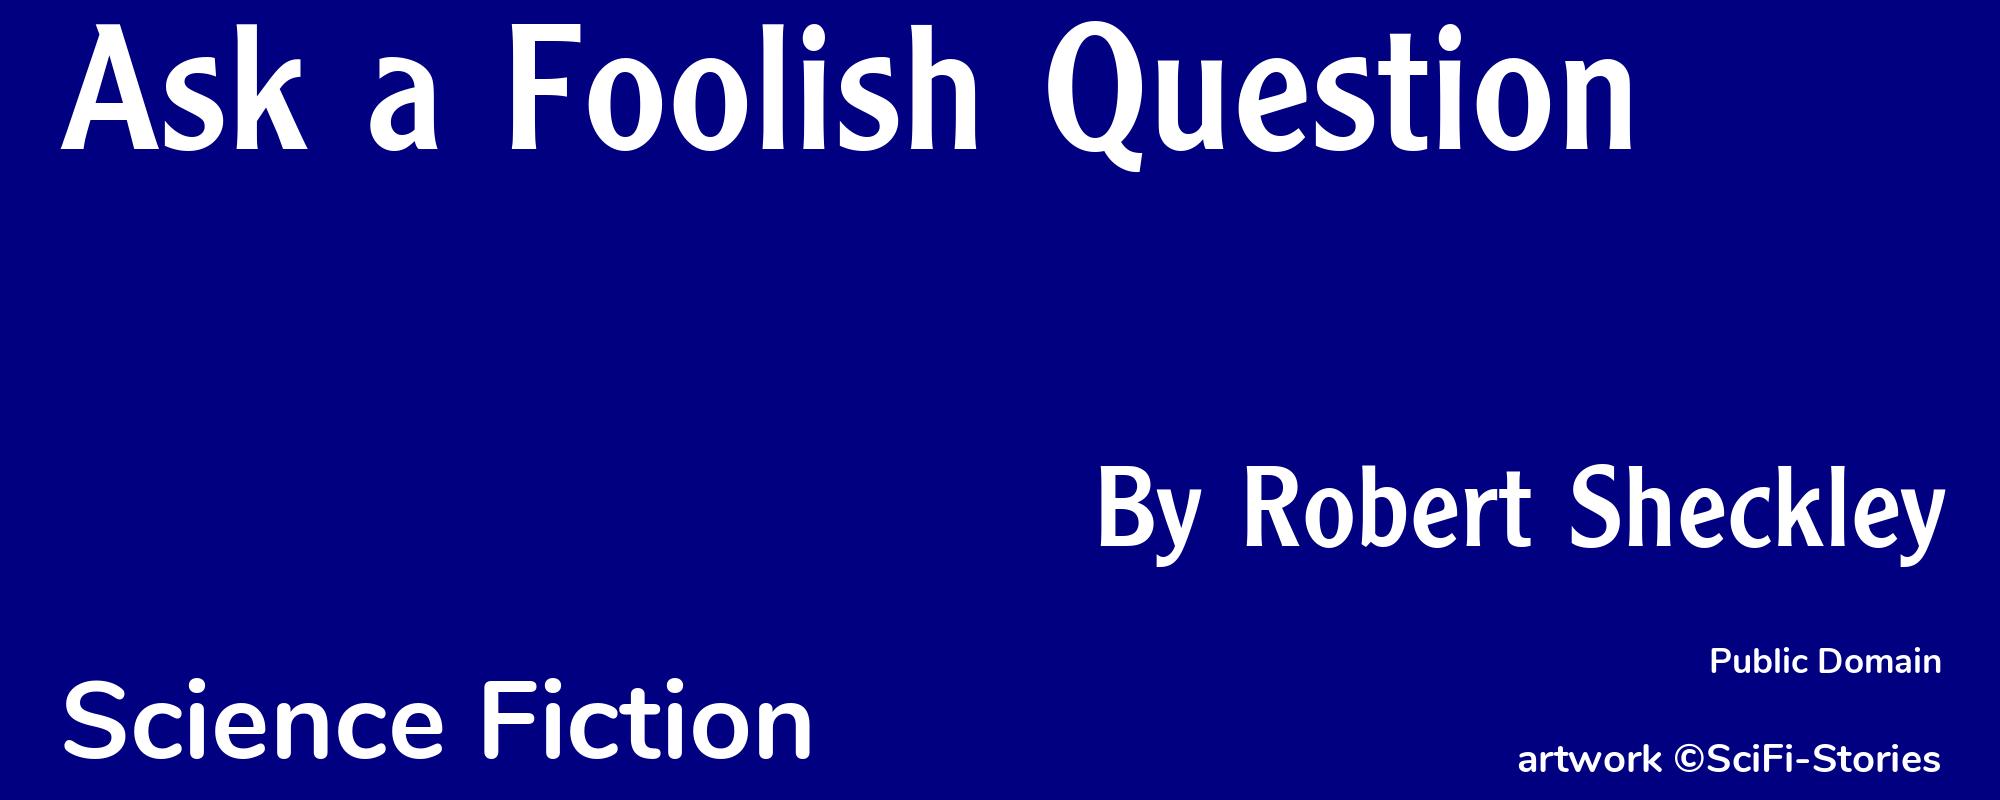 Ask a Foolish Question - Cover